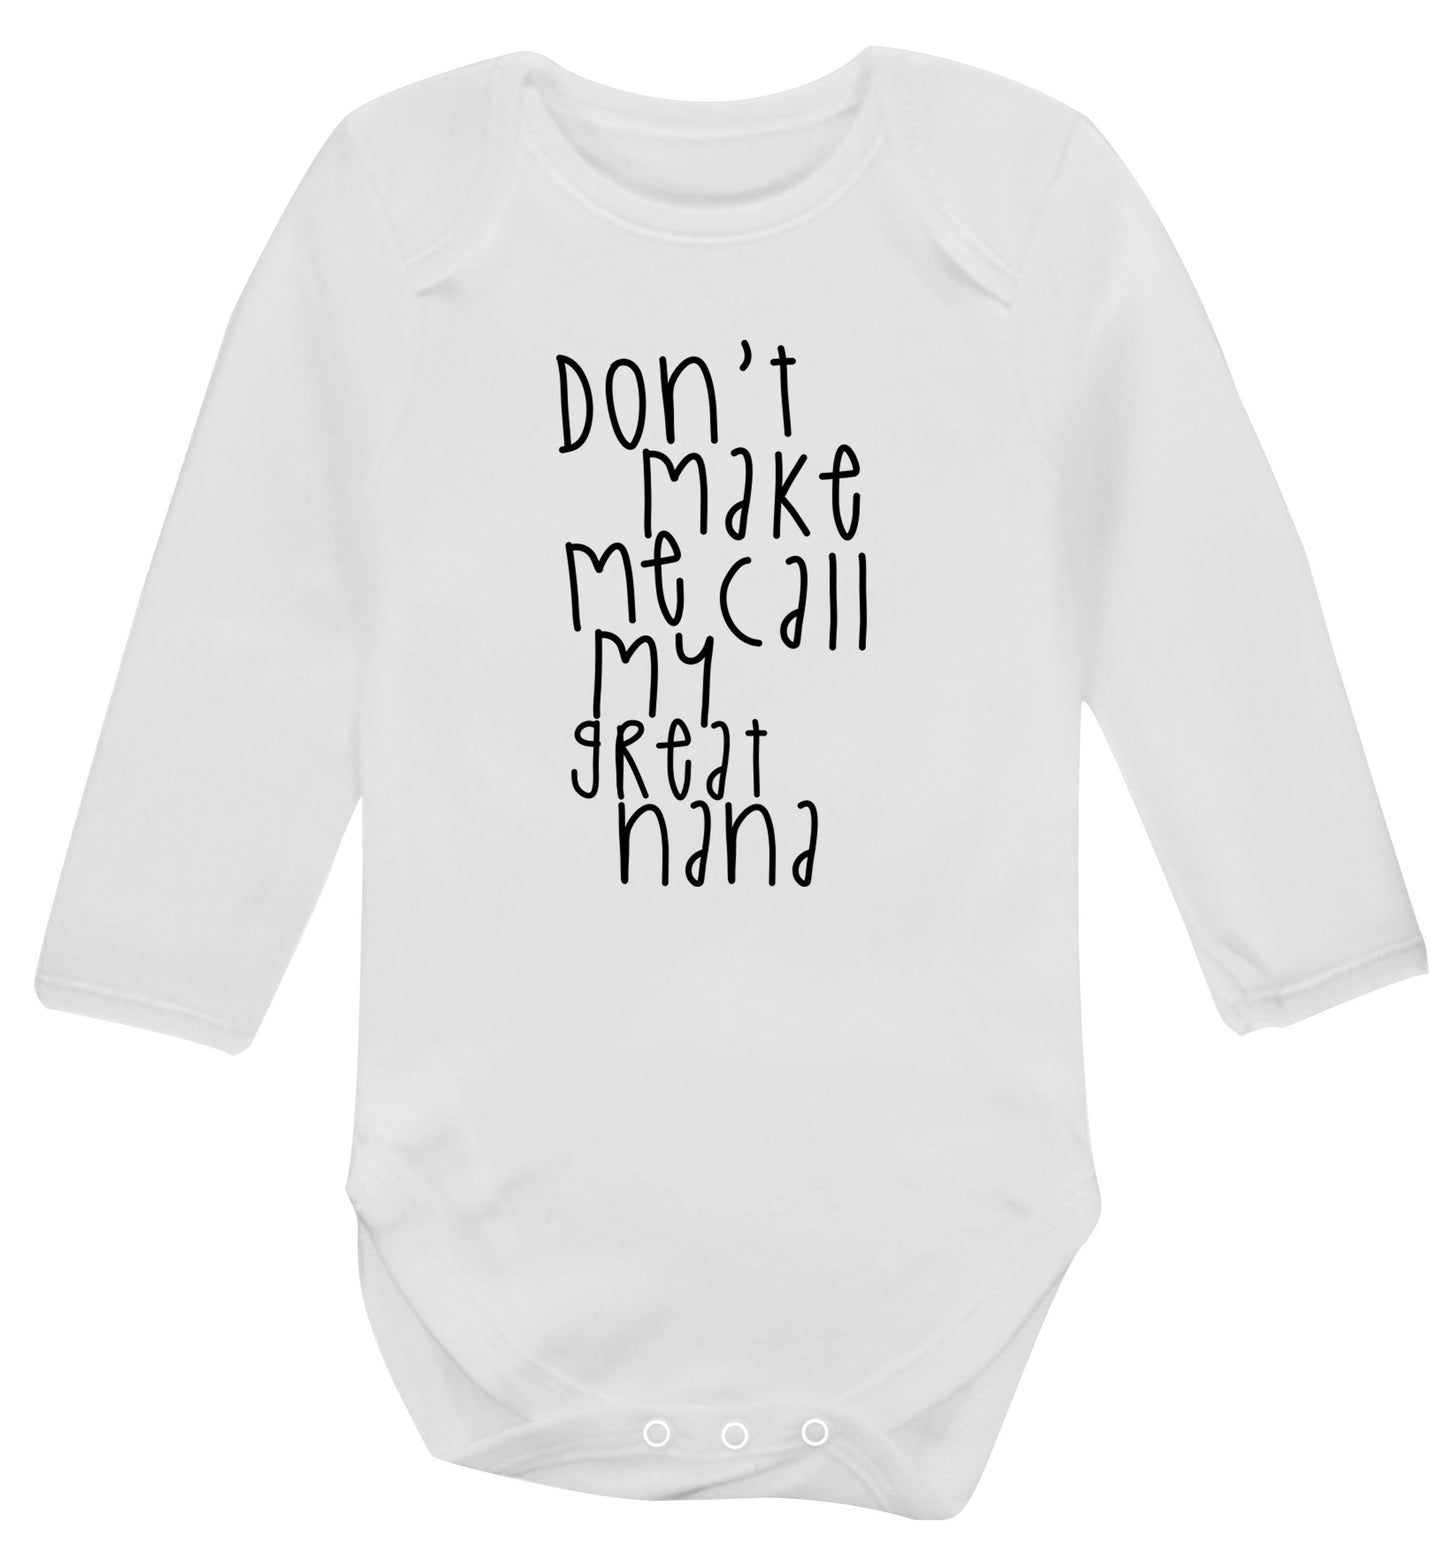 Don't make me call my great nana Baby Vest long sleeved white 6-12 months